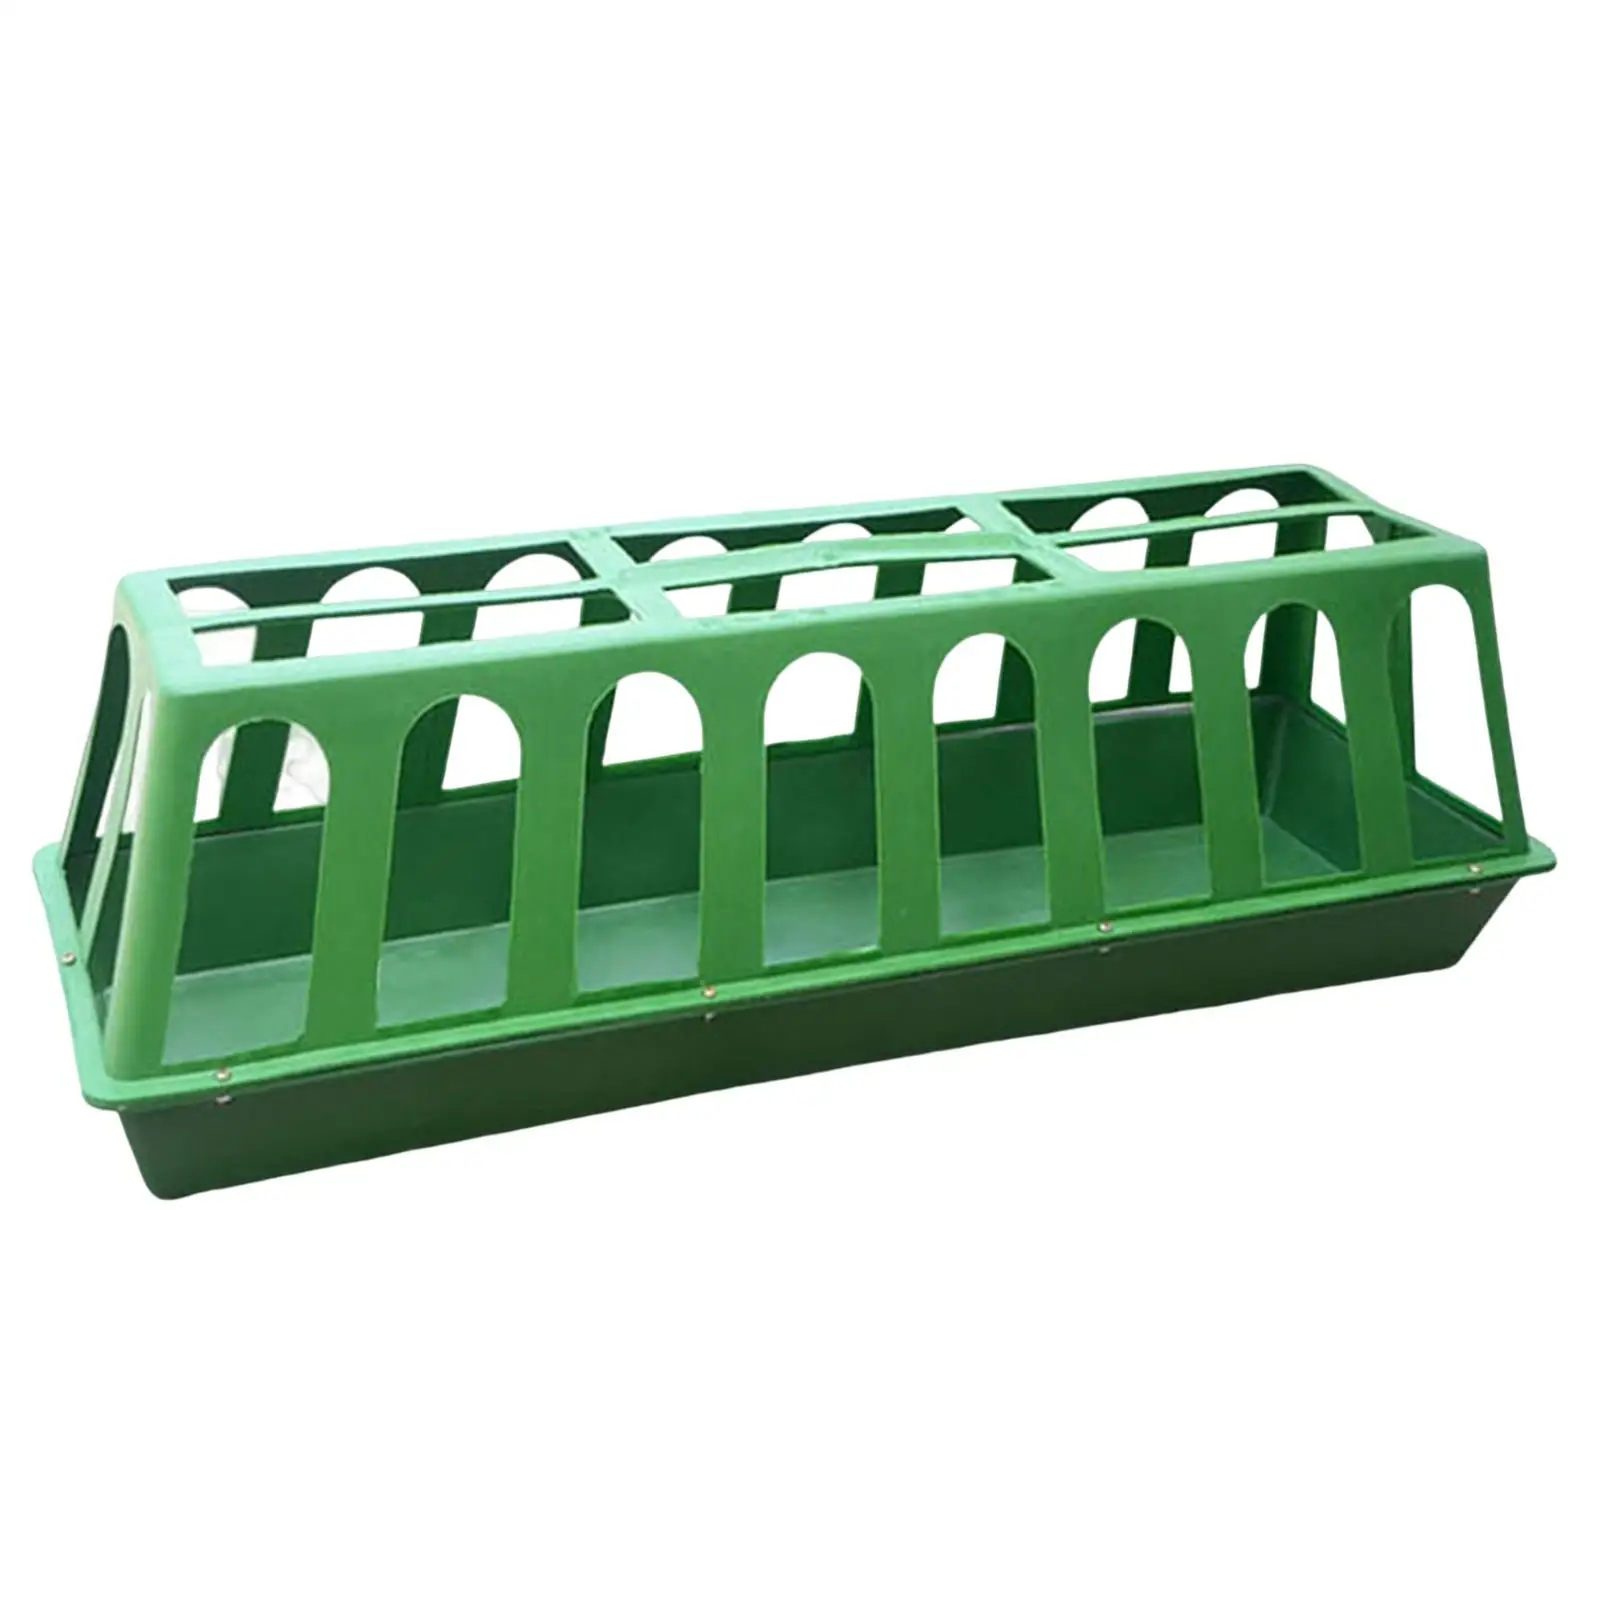 Small Poultry Feeder for Pigeon Quails Duck Birds, No Waste Multihole Birds Feeding Dish Dispenser Chick Feeder